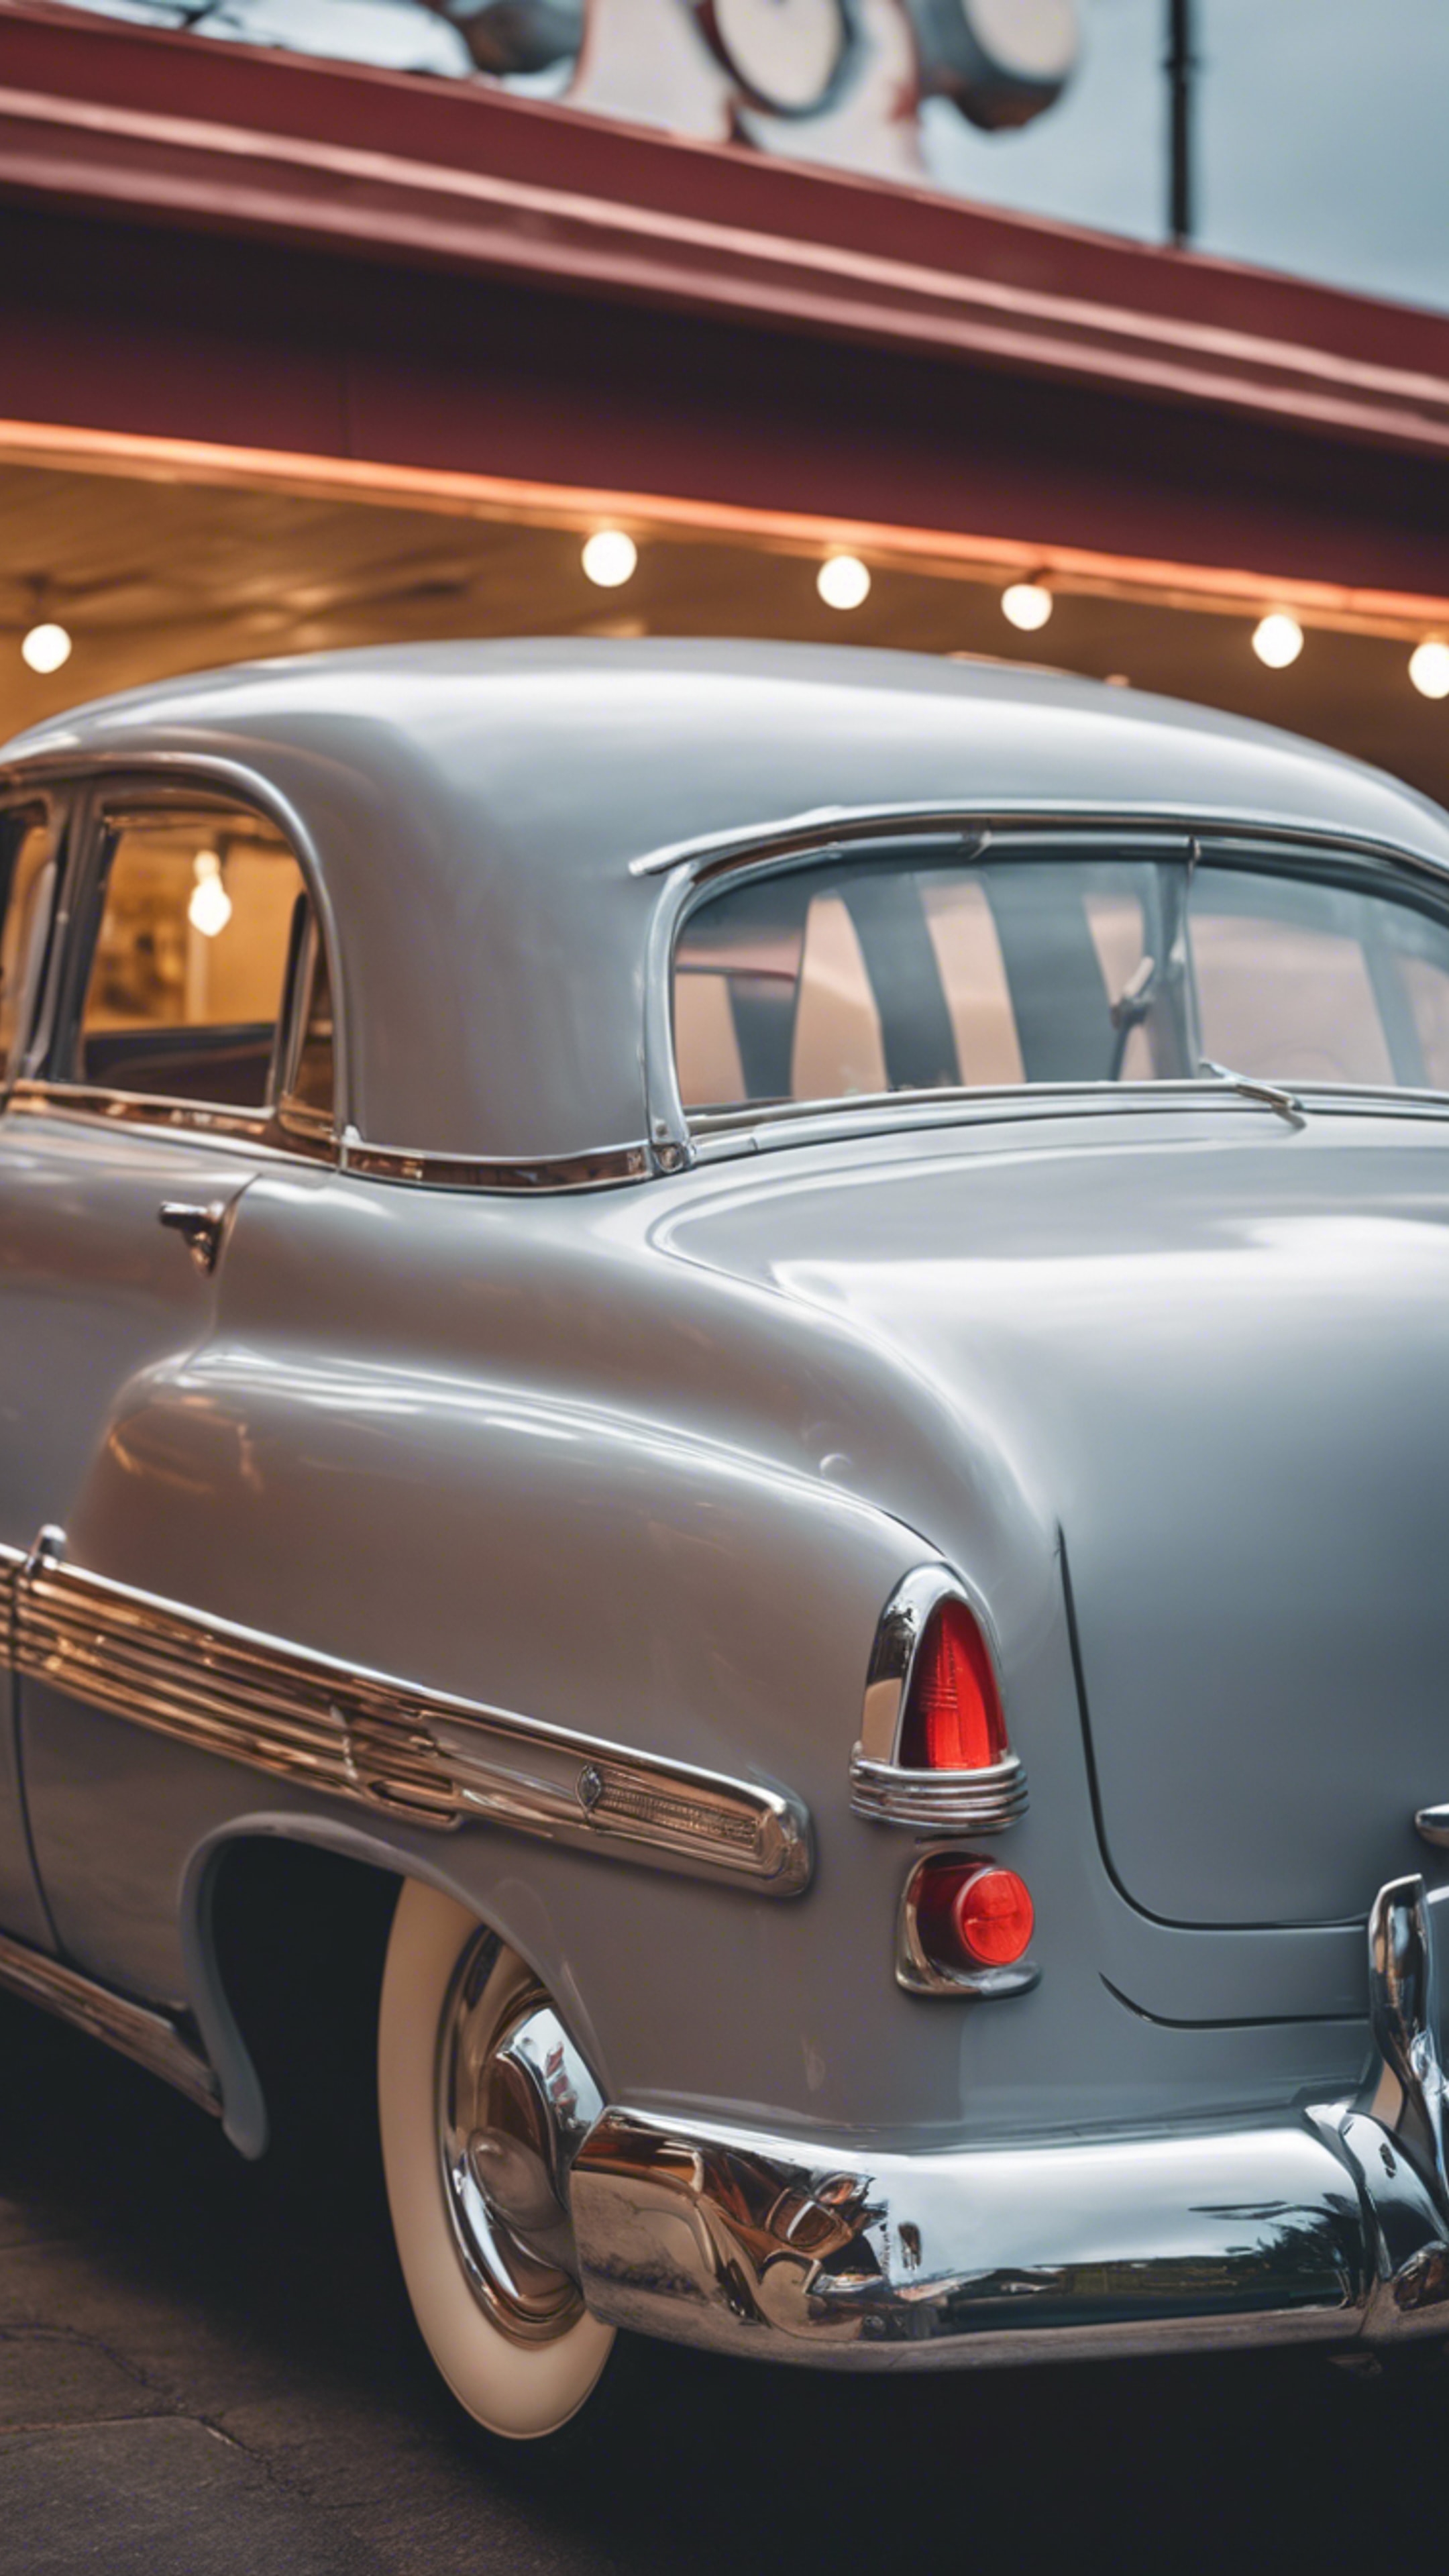 A vintage 1950s car, painted in light gray, parked outside a quirky roadside diner. Hintergrund[6f1ad1f93eb7446a85d1]